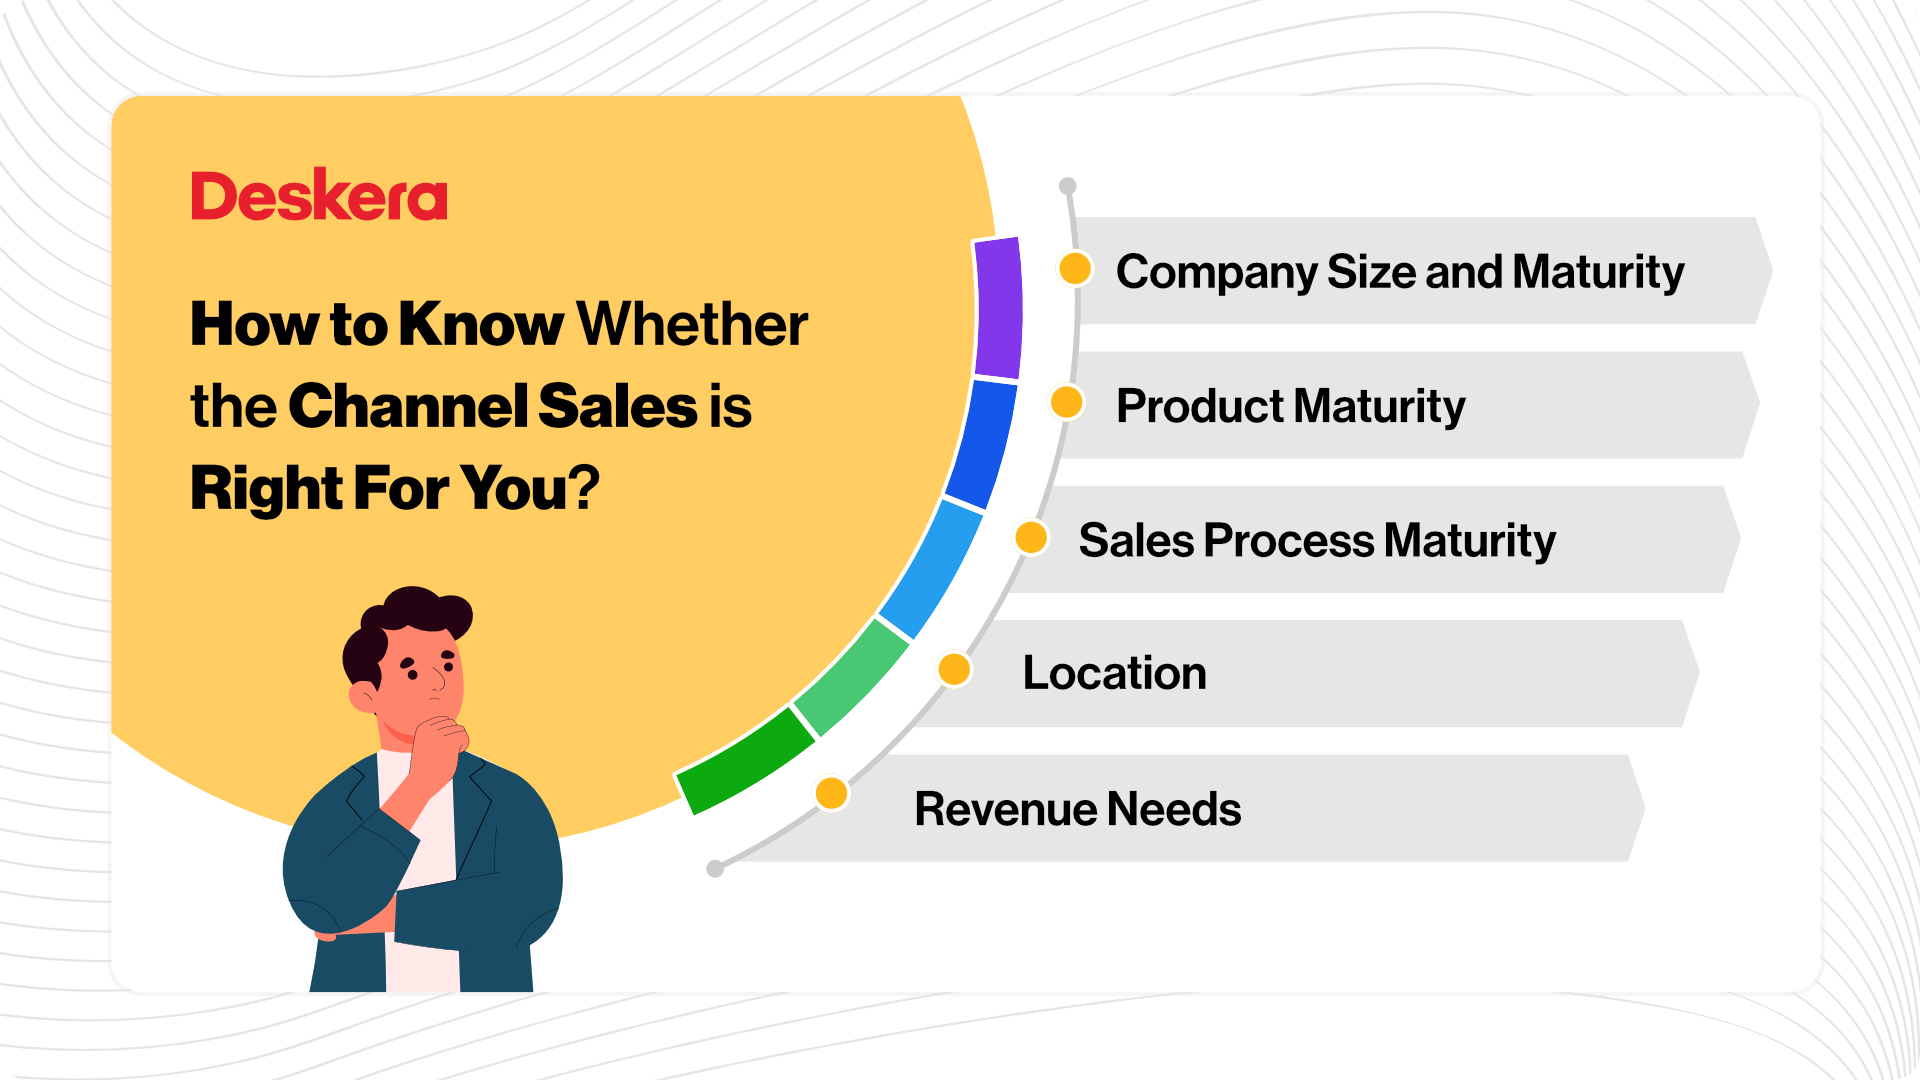 How to Know Whether the Channel Sales is Right For You?